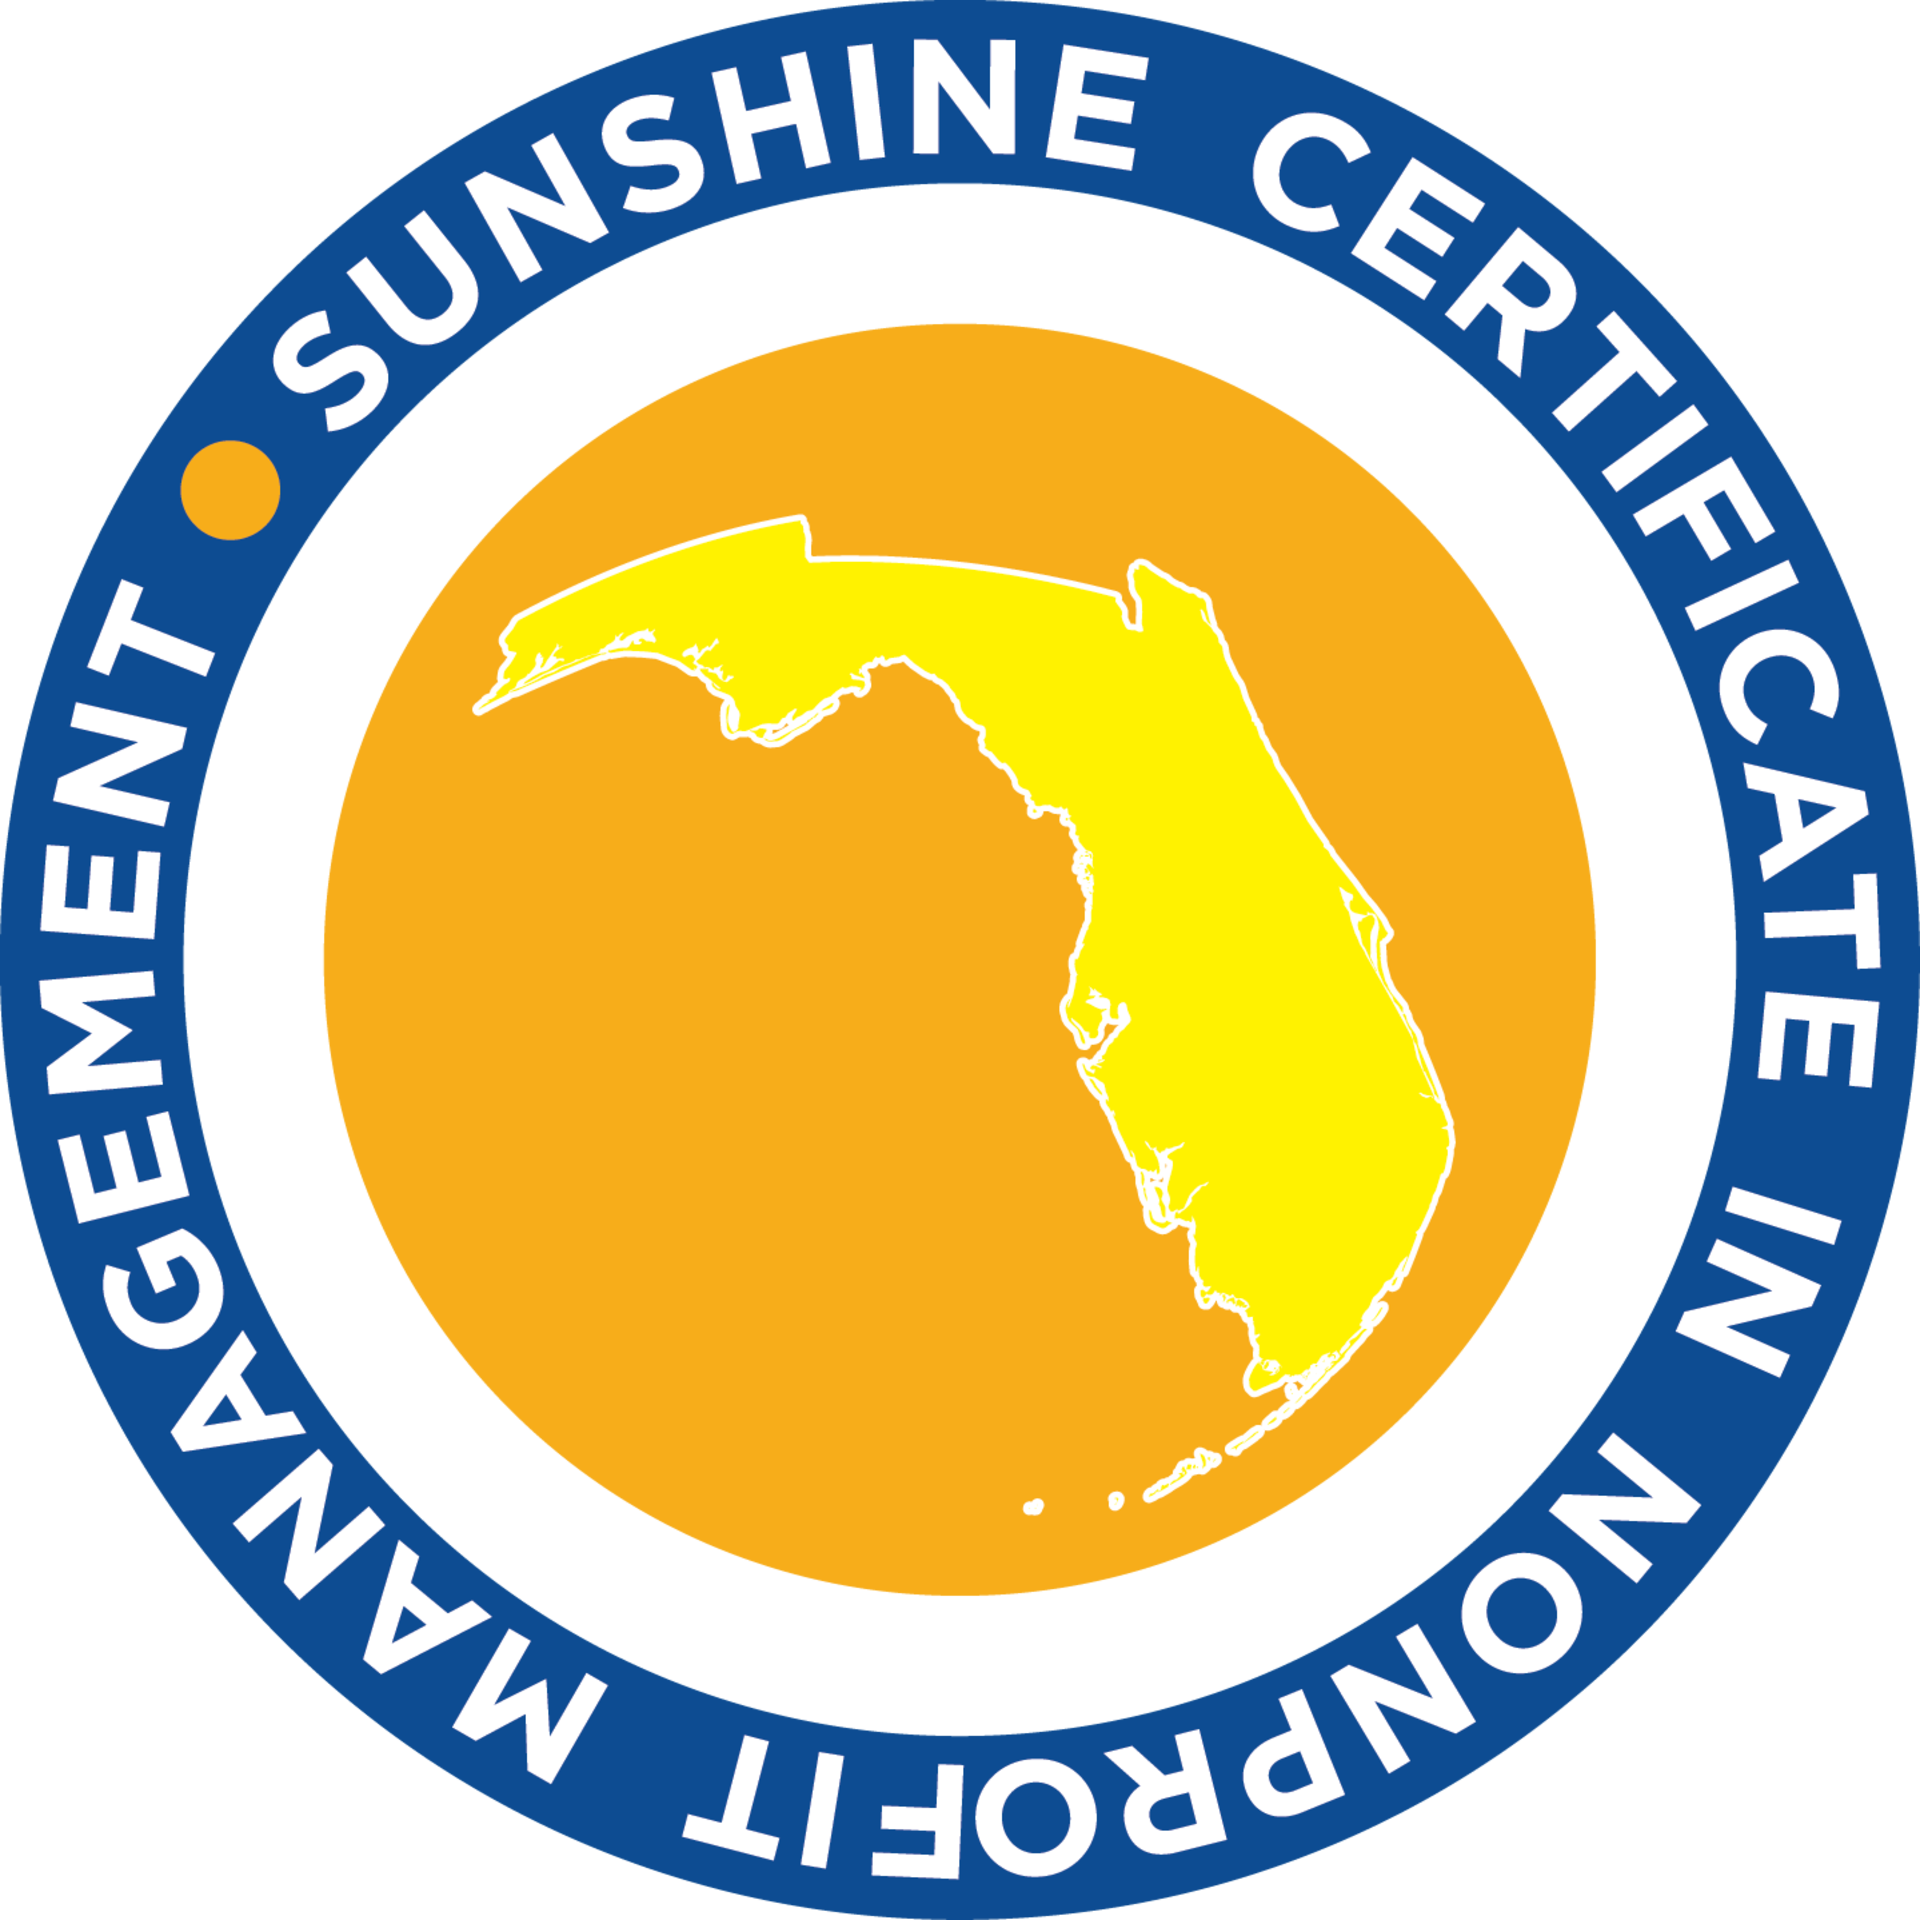  Florida Nonprofits’ Nonprofit Accounting Class of the Sunshine Certificate in.......